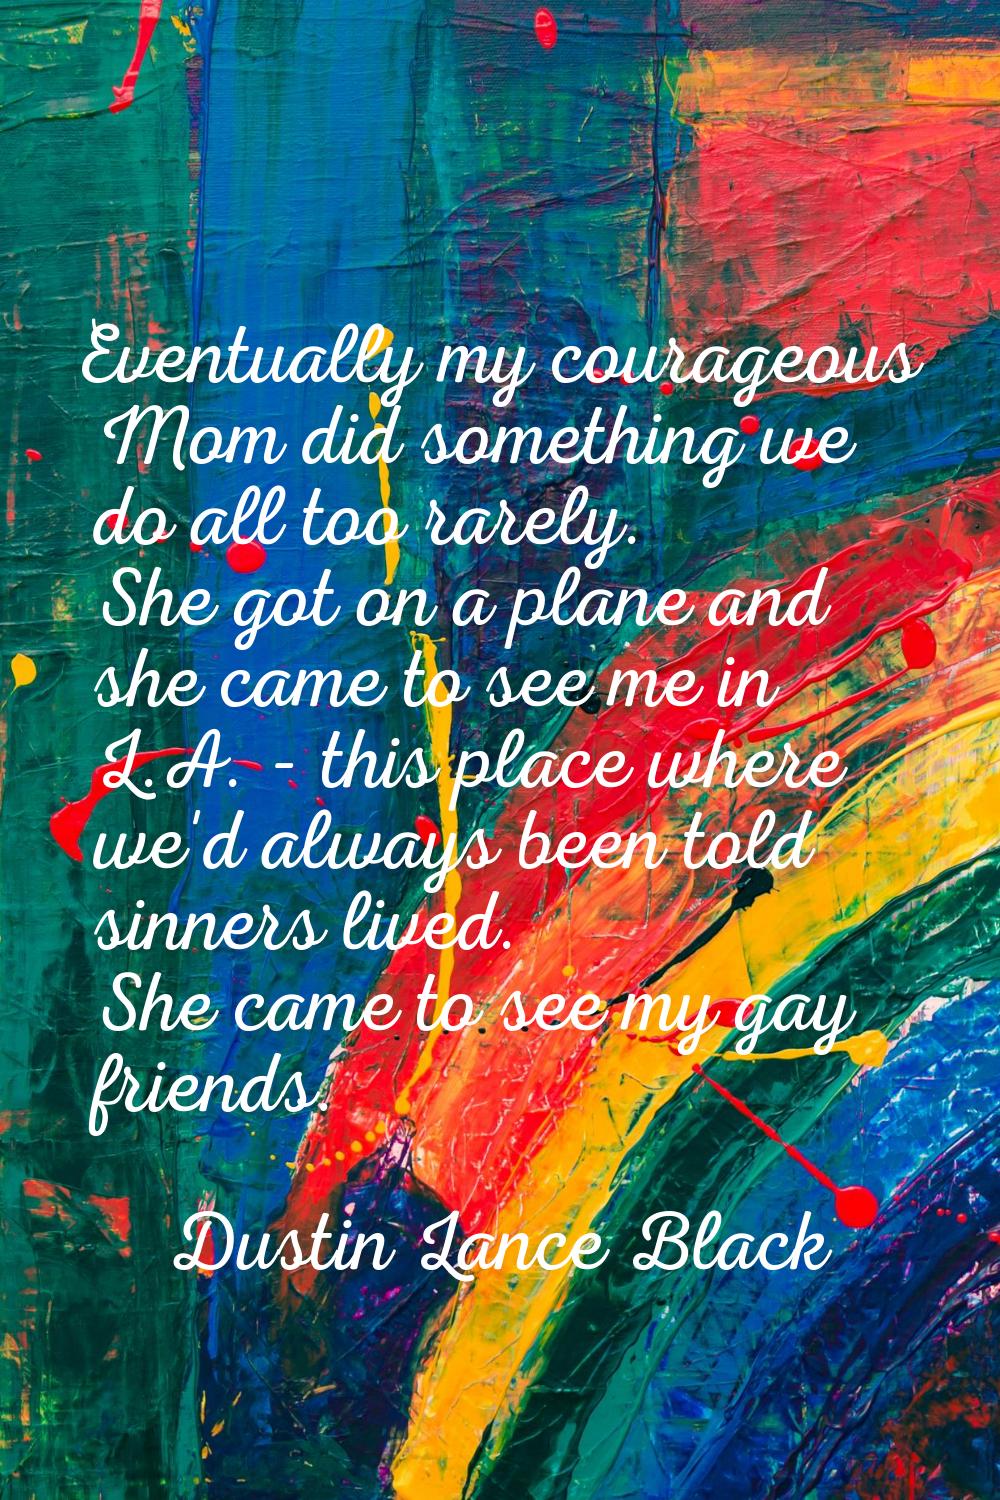 Eventually my courageous Mom did something we do all too rarely. She got on a plane and she came to